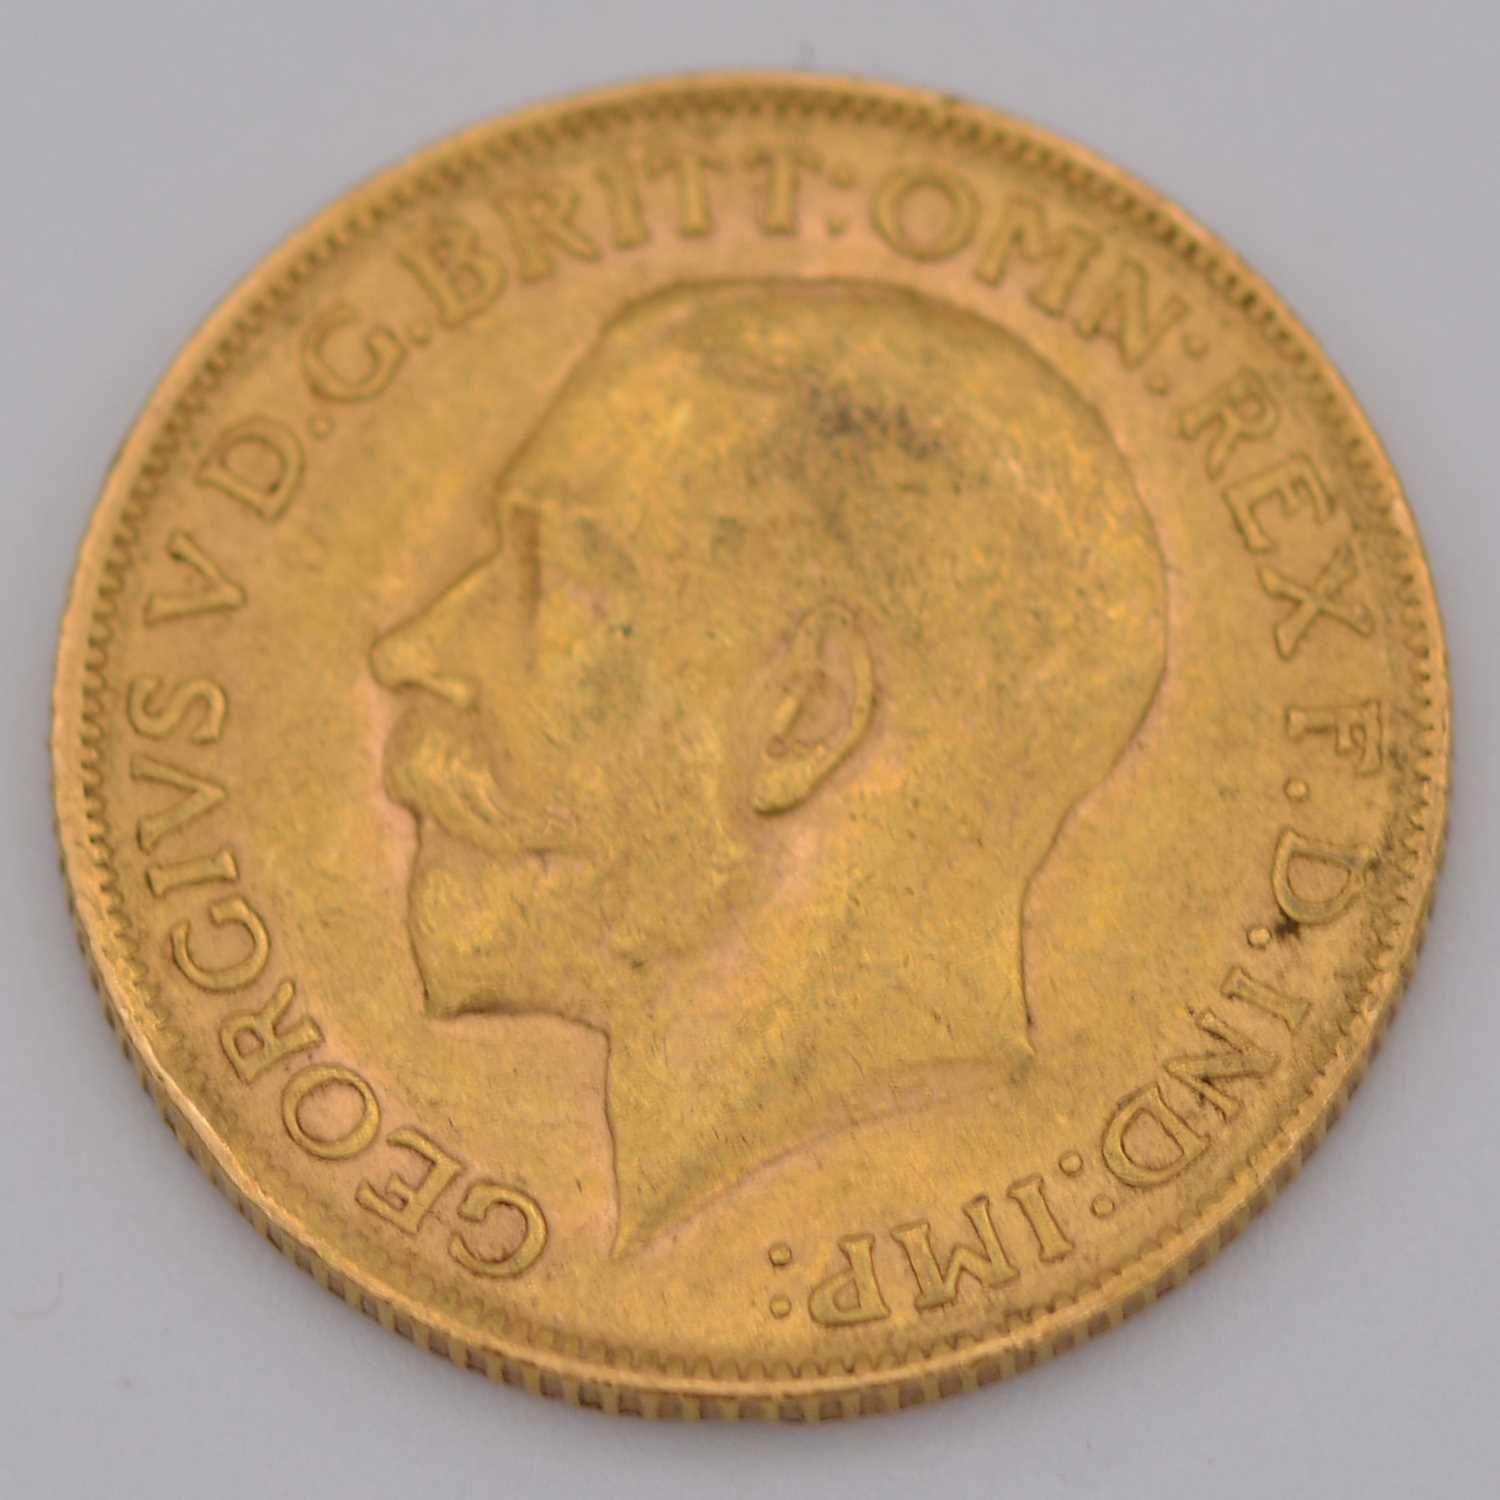 George V gold Sovereign coin, 1911, 8g. - Image 2 of 2